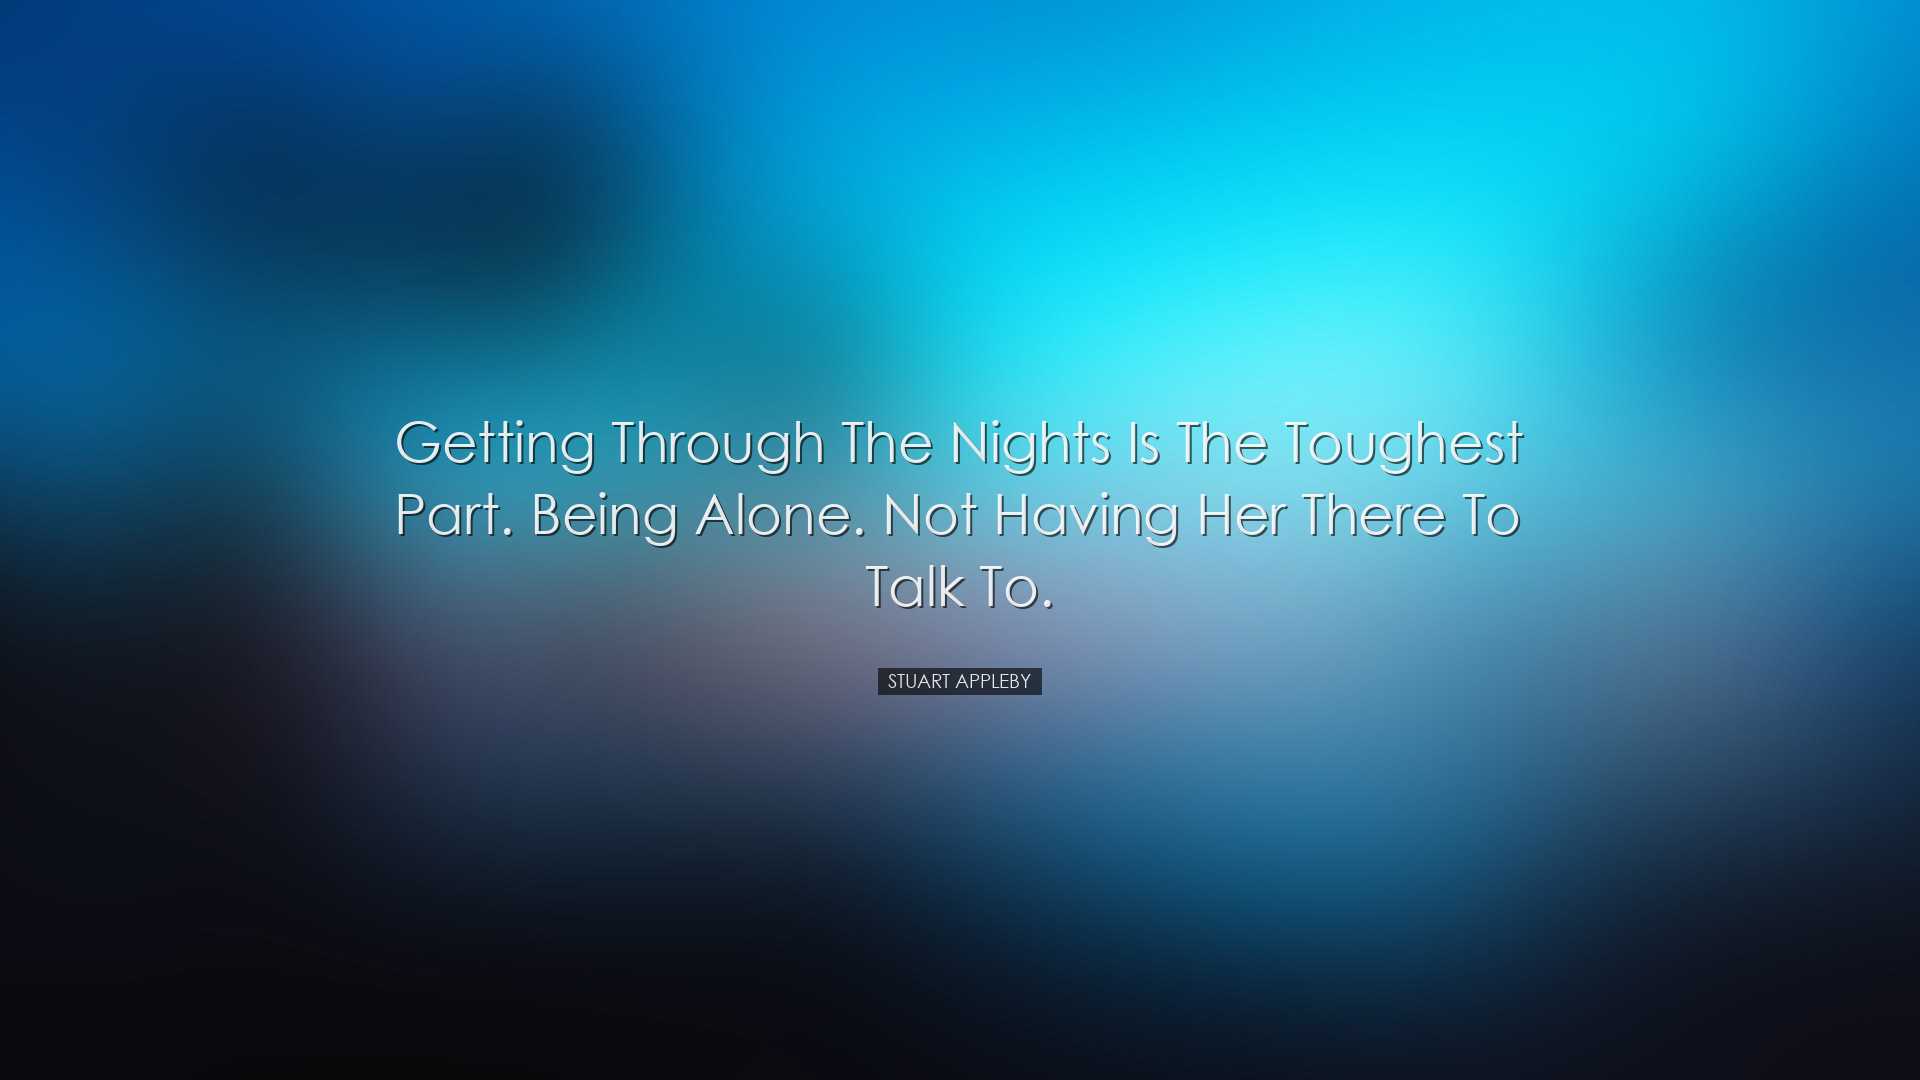 Getting through the nights is the toughest part. Being alone. Not